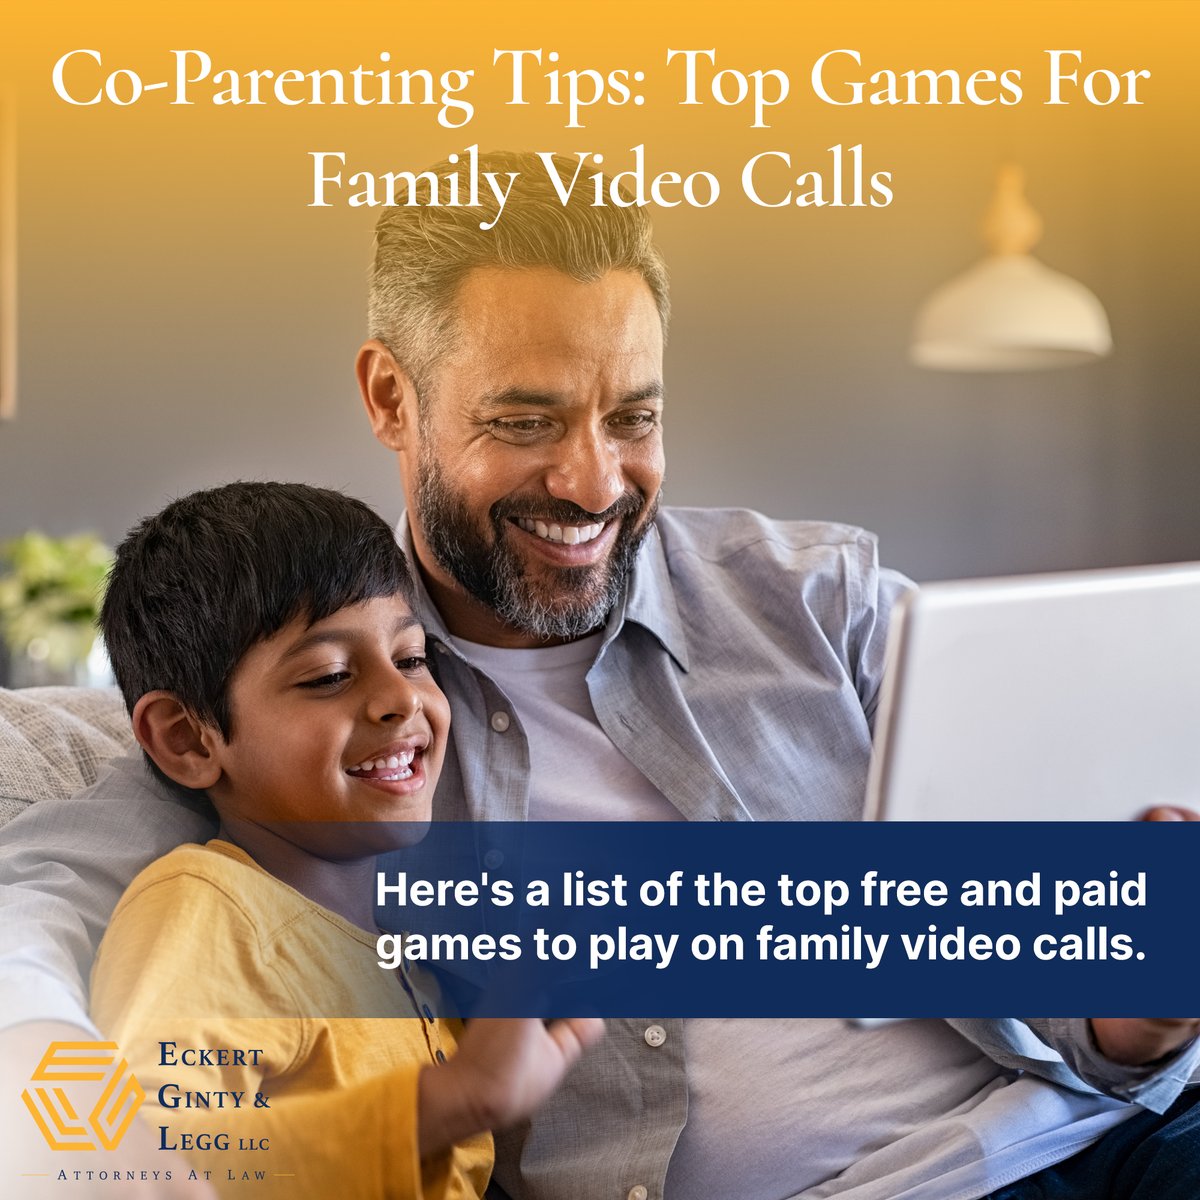 Family video calls are an exceptional way to bond and connect with your children. Adding some extra fun with a game can go a long way, too! Here's a list from Our Family Wizard on the top free and paid games to play on family video calls. bit.ly/3UTFgvx